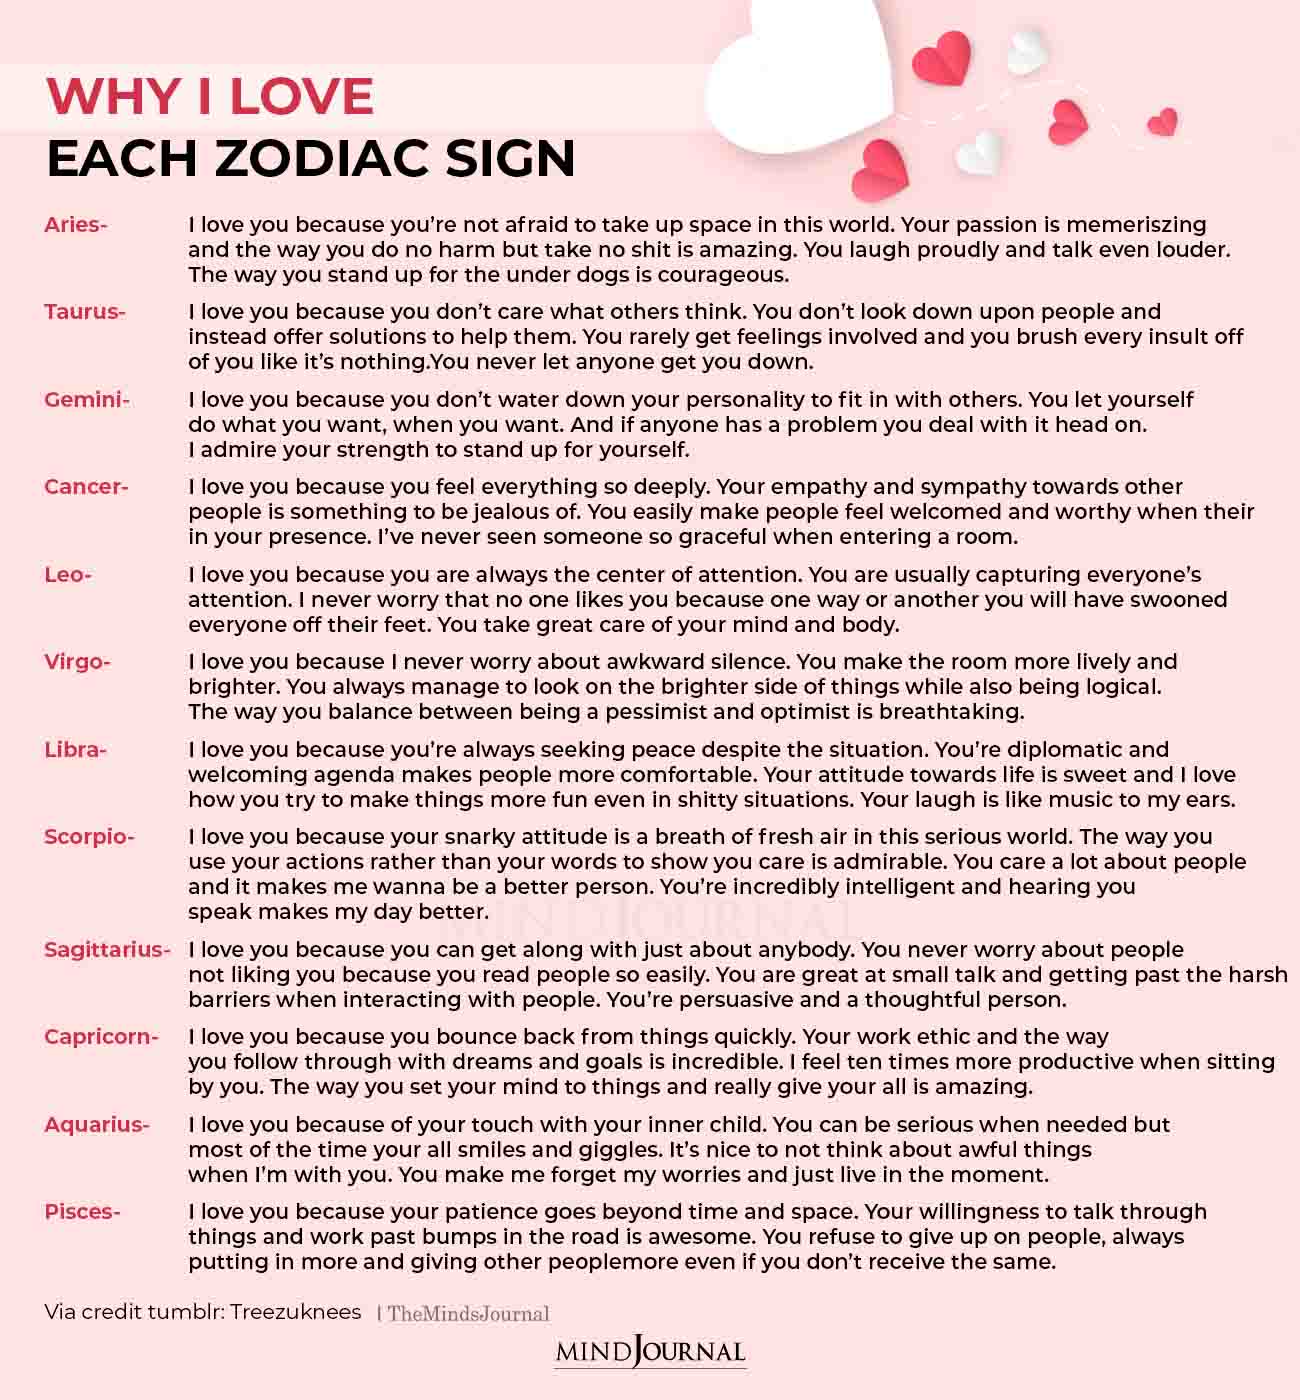 Why I Love The Zodiac Signs